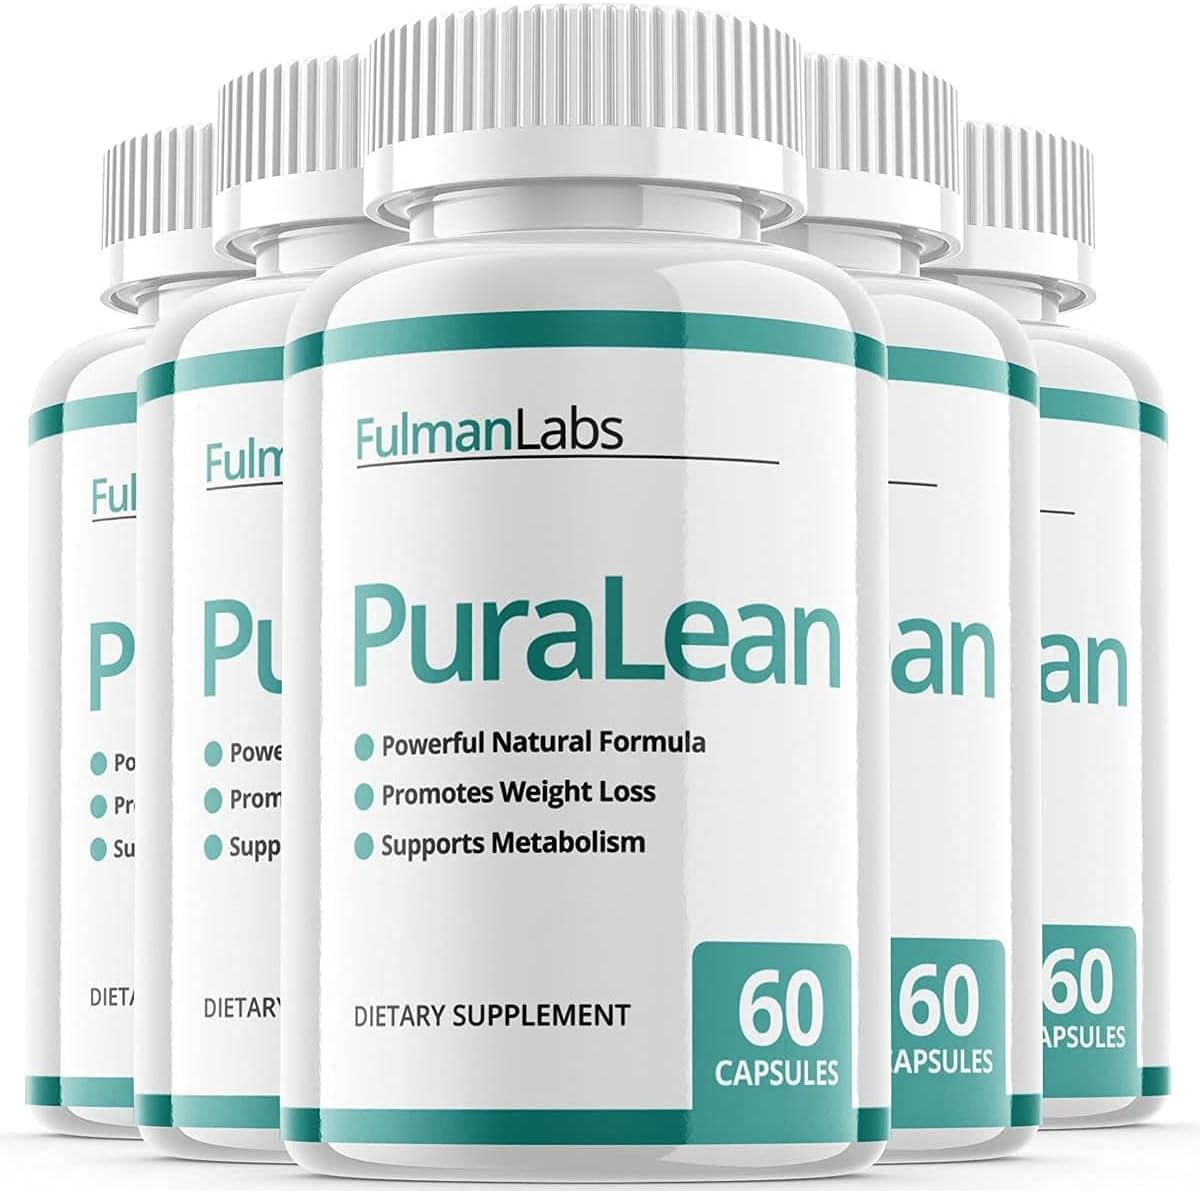 Discover Puralean: The Natural Solution for Rapid Weight Loss!

puraleans.com

Say goodbye to stubborn fat with Puralean! This powerful weight loss supplement .

#Puralean #WeightLoss #FatBurner #HealthyLiving